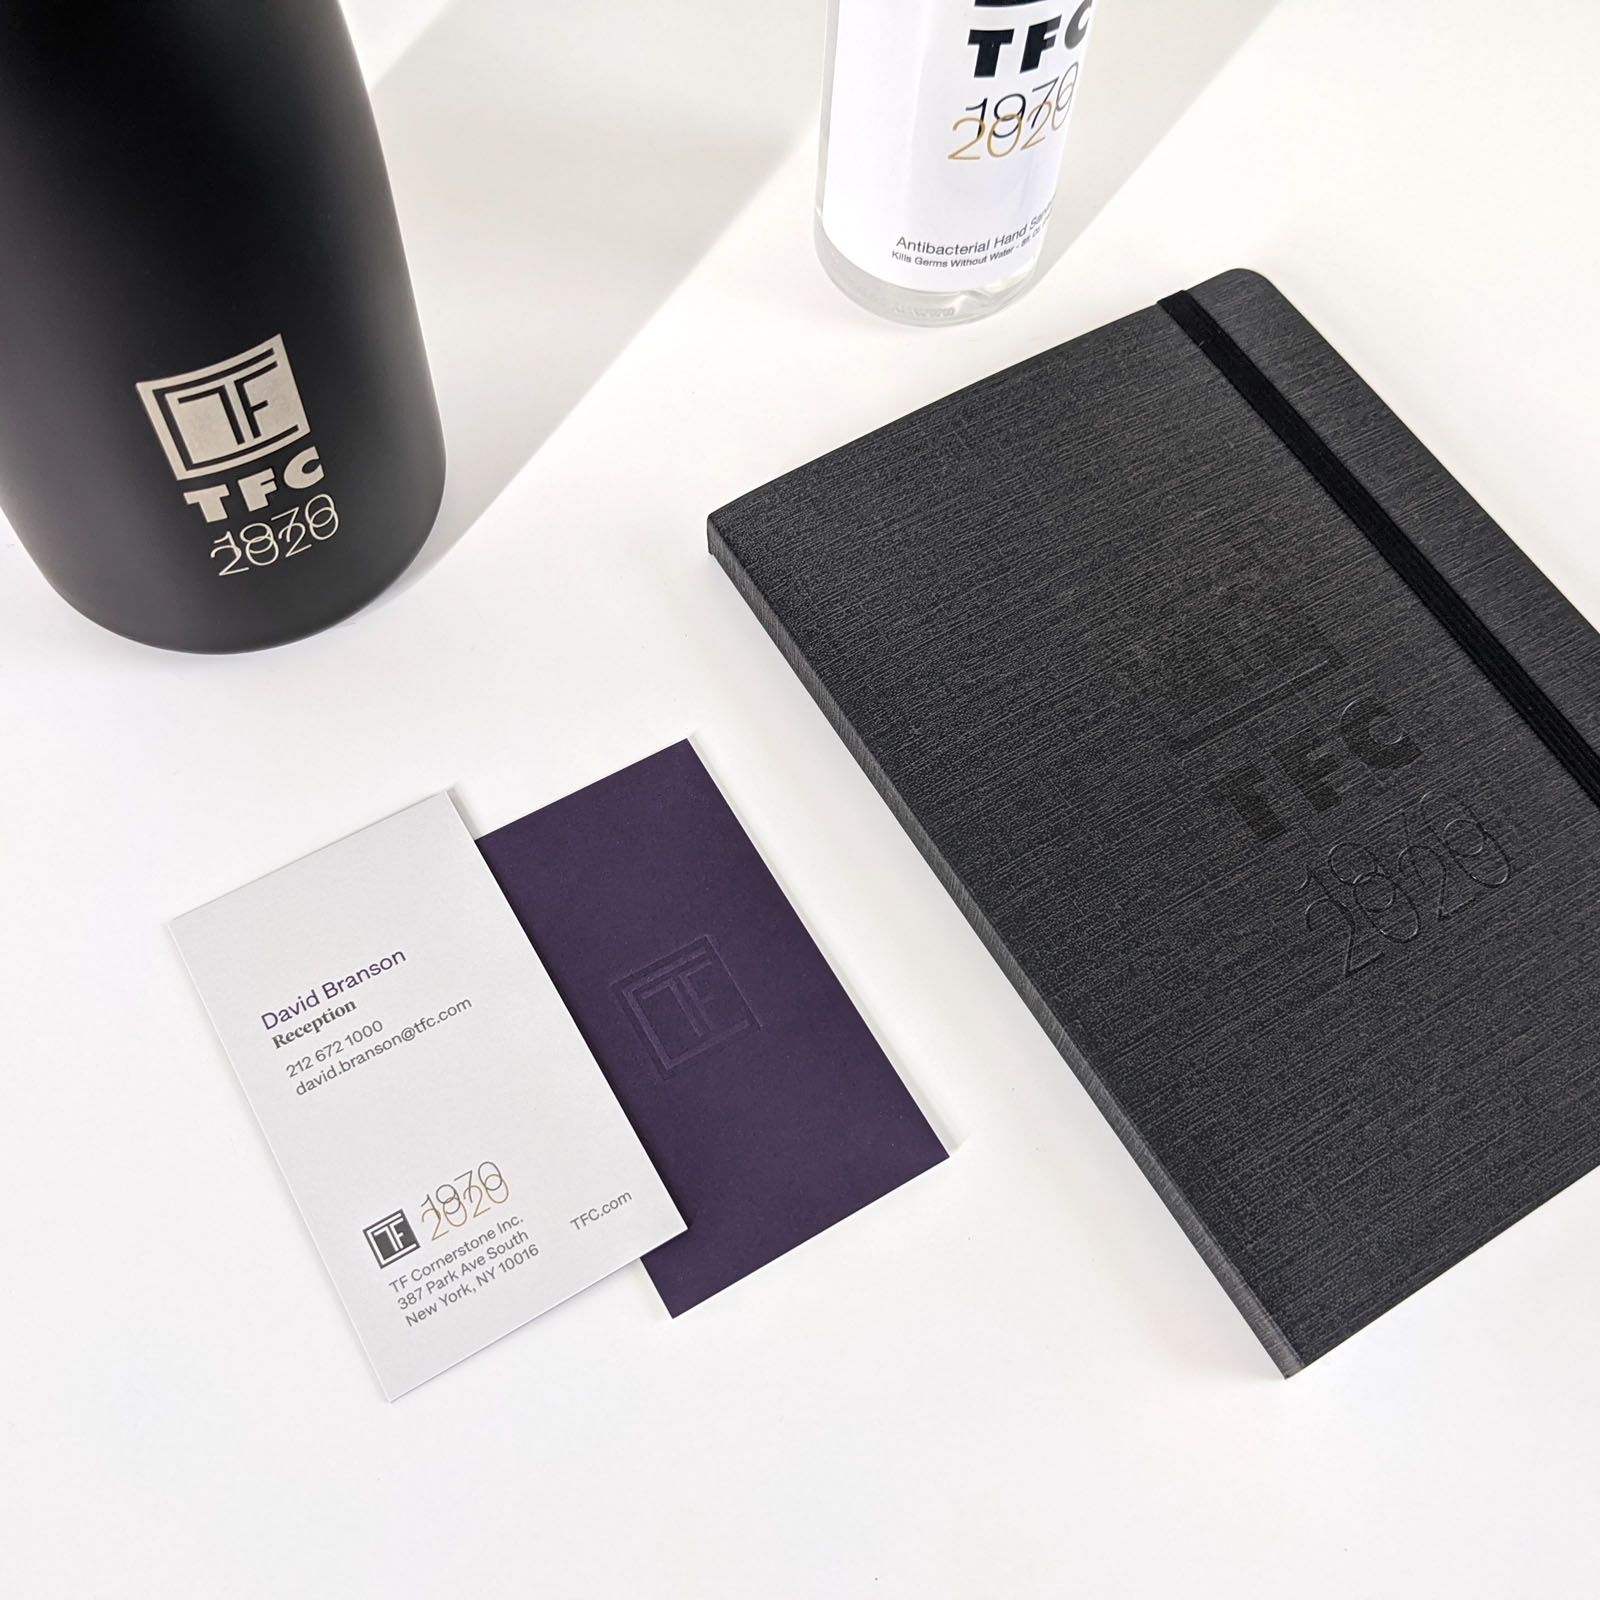 Photograph of a business card, small notebook, aluminum water bottle, and hand sanitizer. All items featuring the TFC 50th anniversary logo.